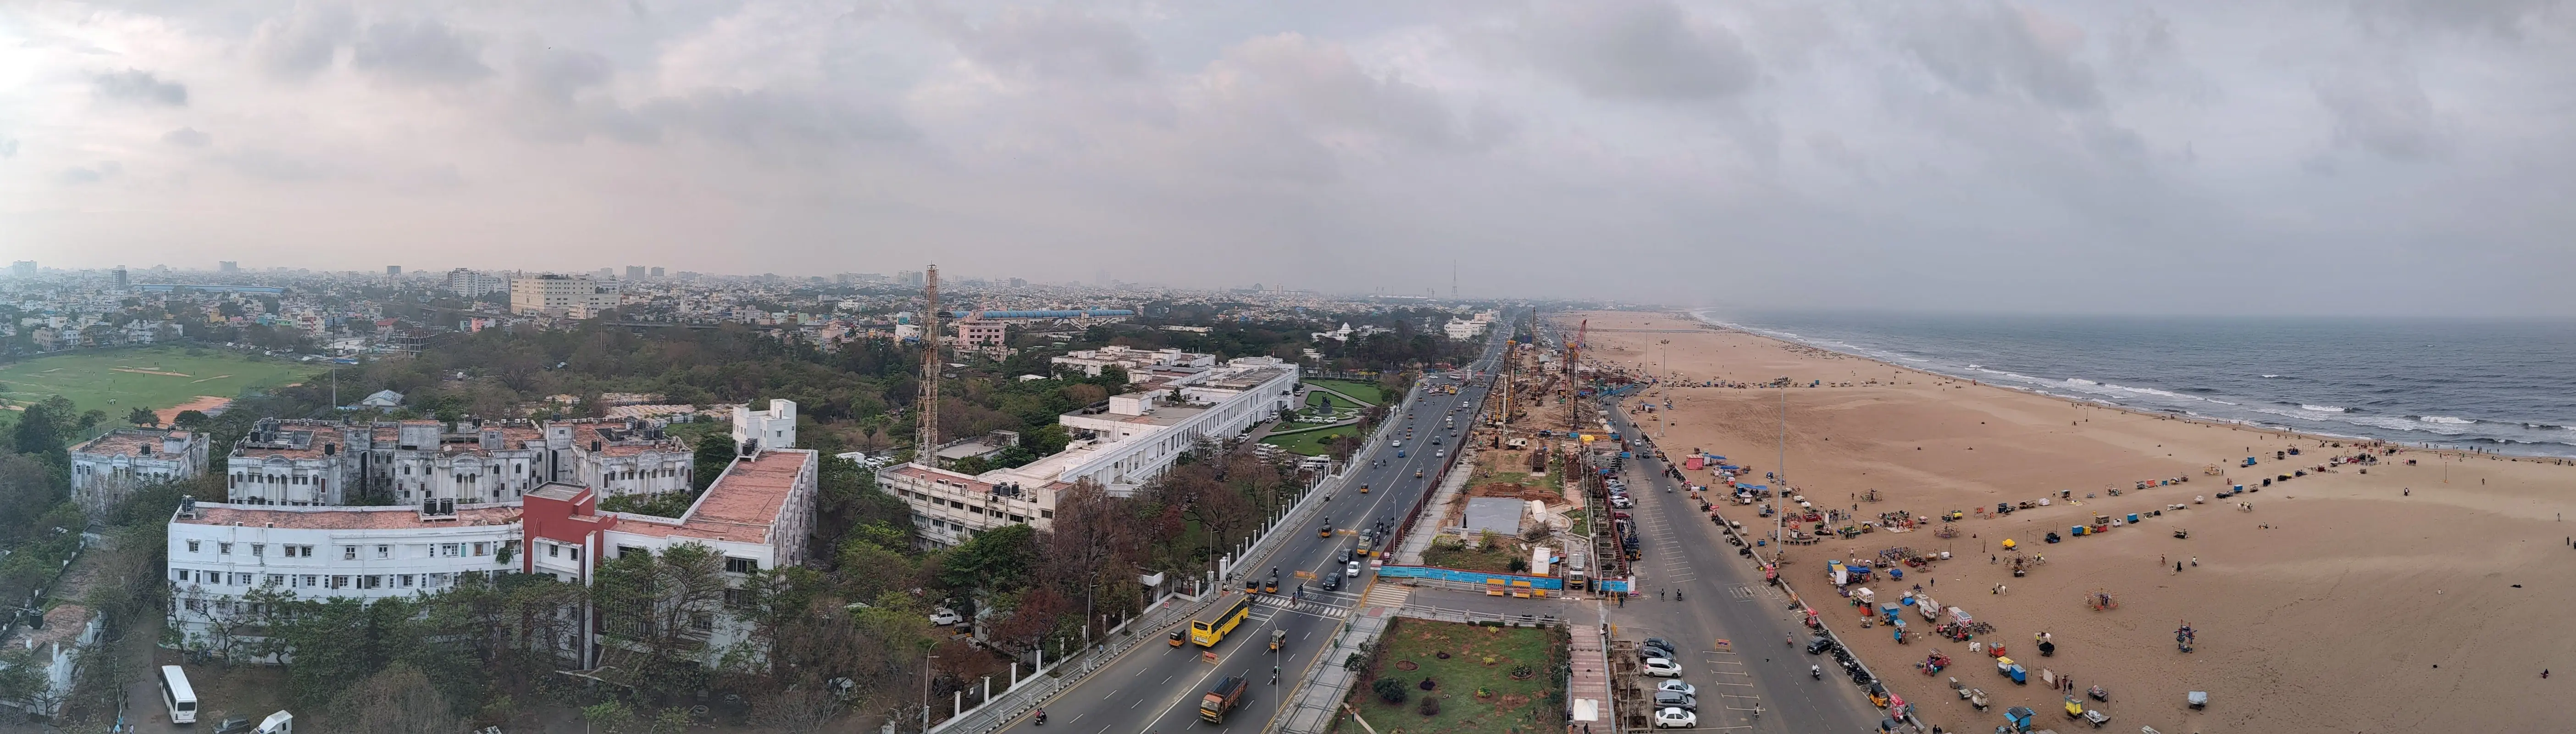 A panorama of Marina beach from atop the Chennai lighthouse